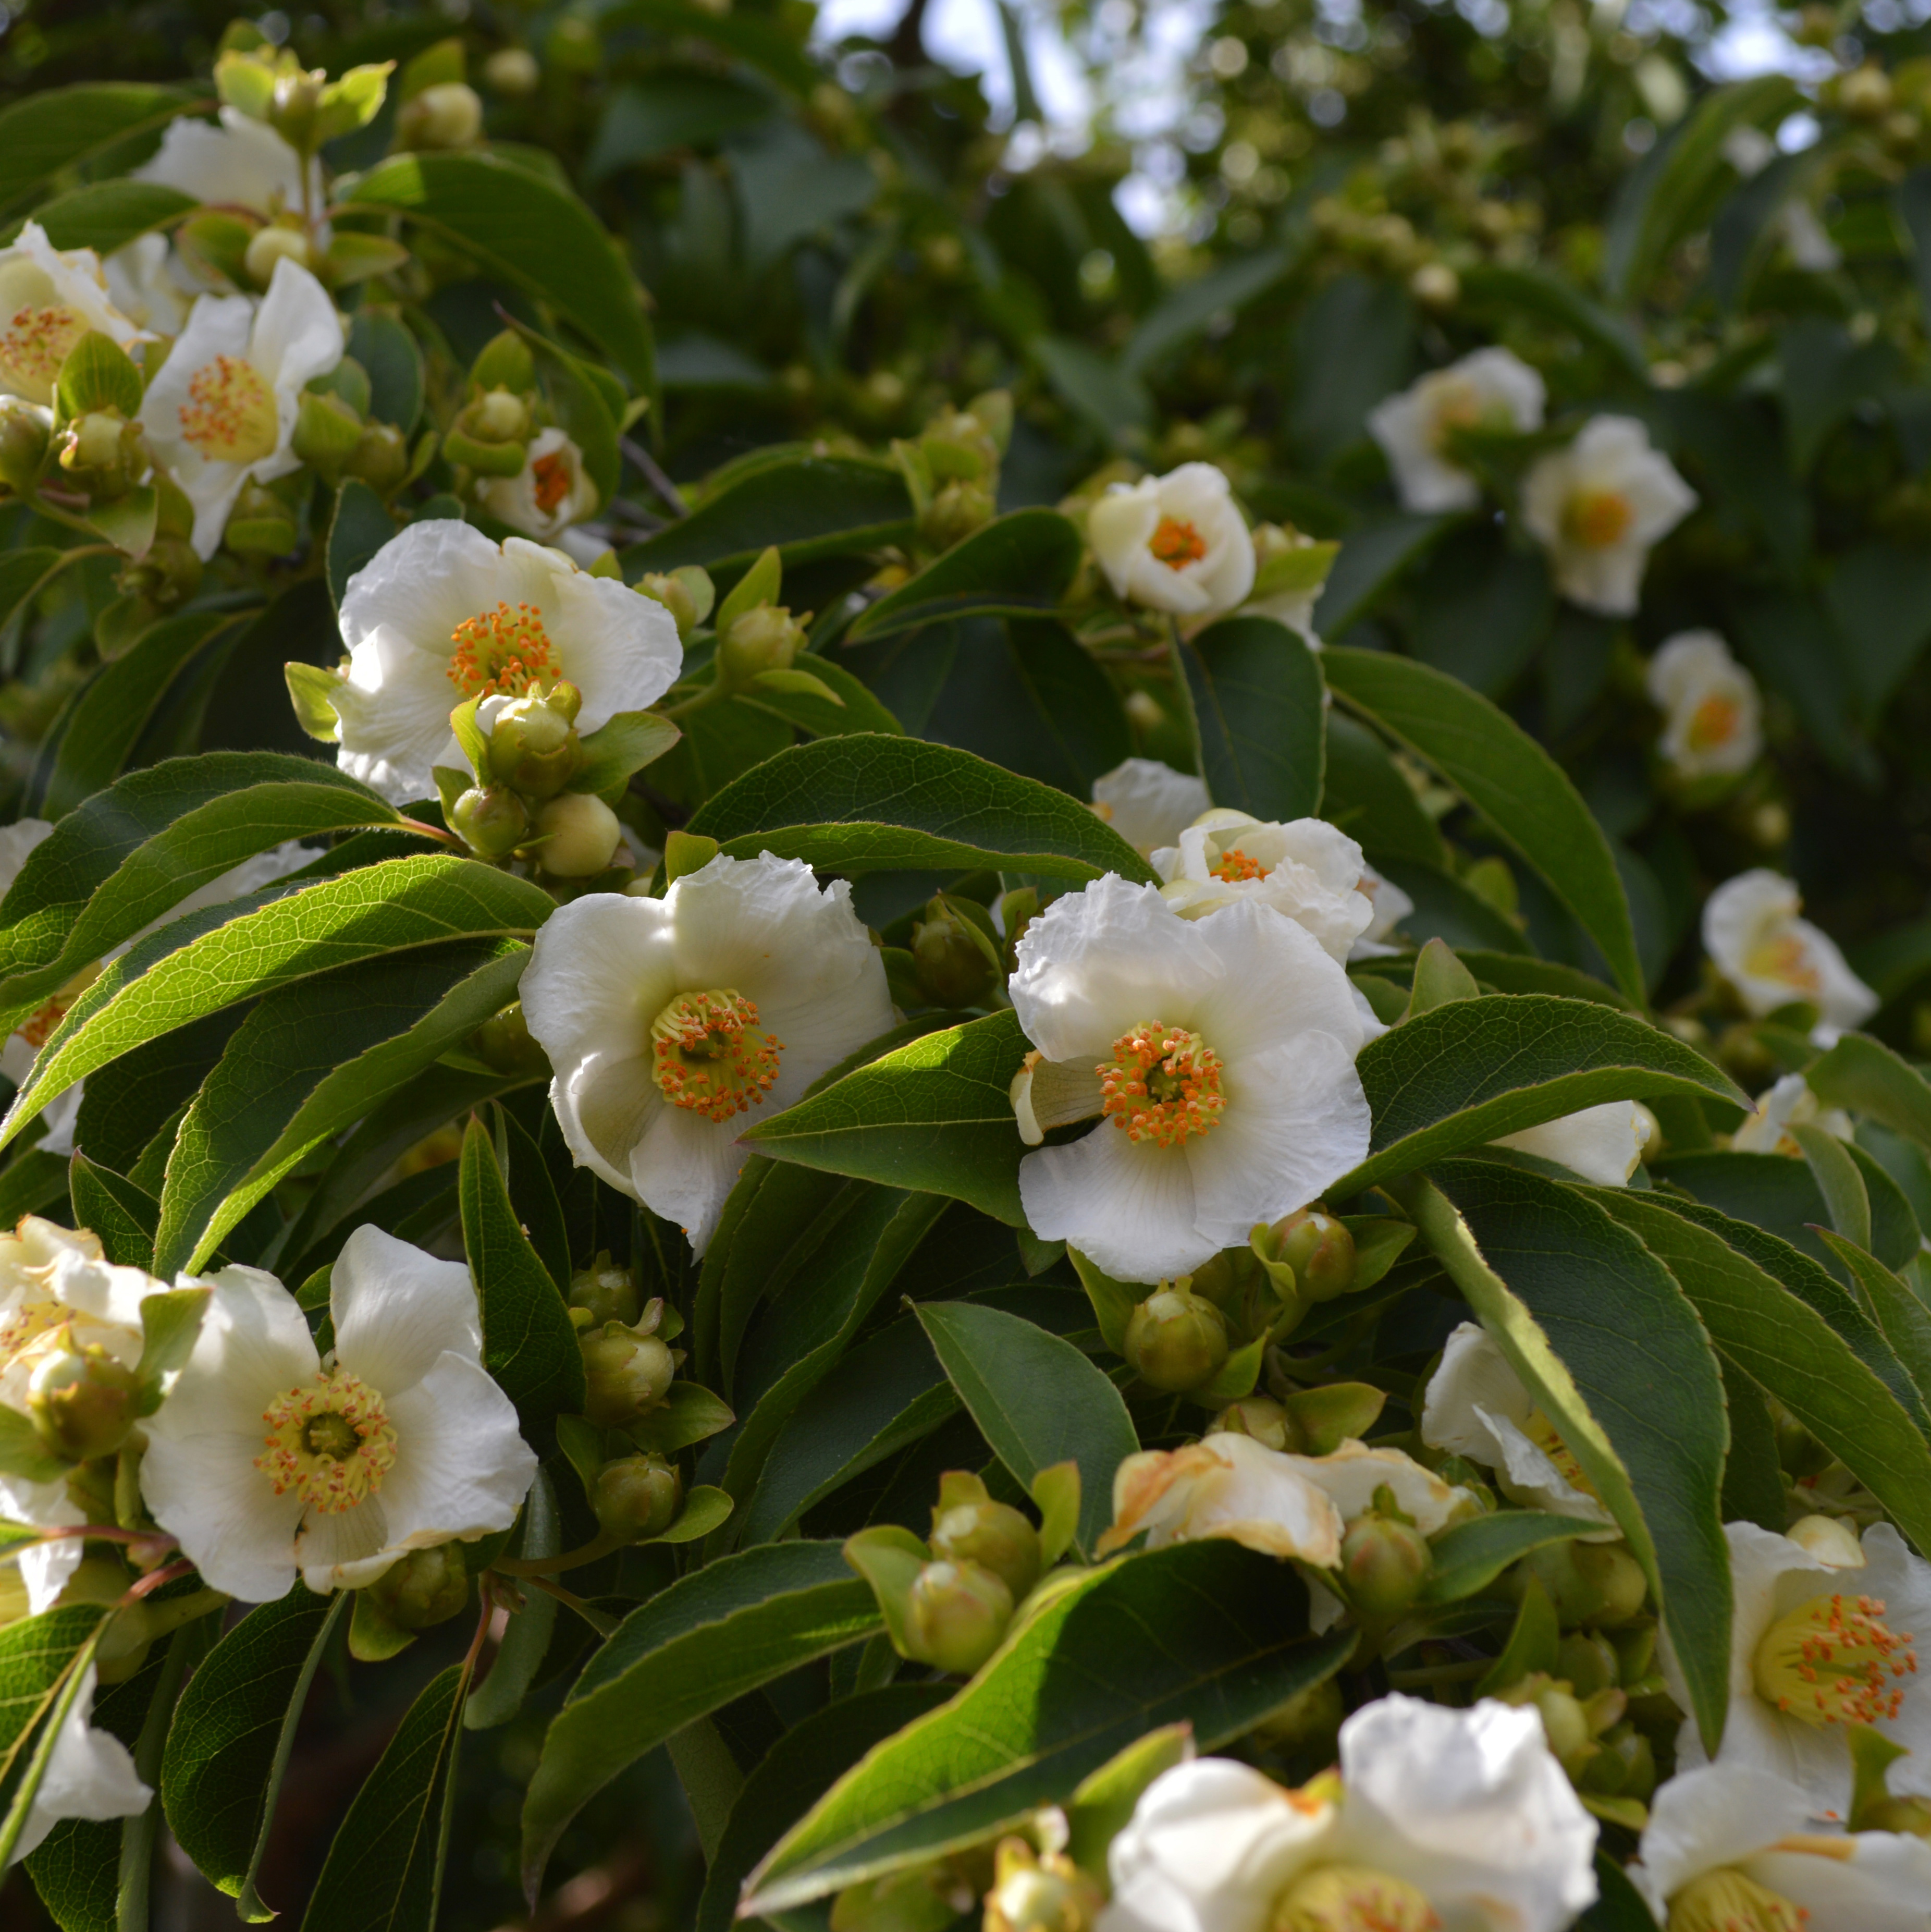 Stewartia monodelpha – white blossoms with yellow centers – are a great option for a shade garden.